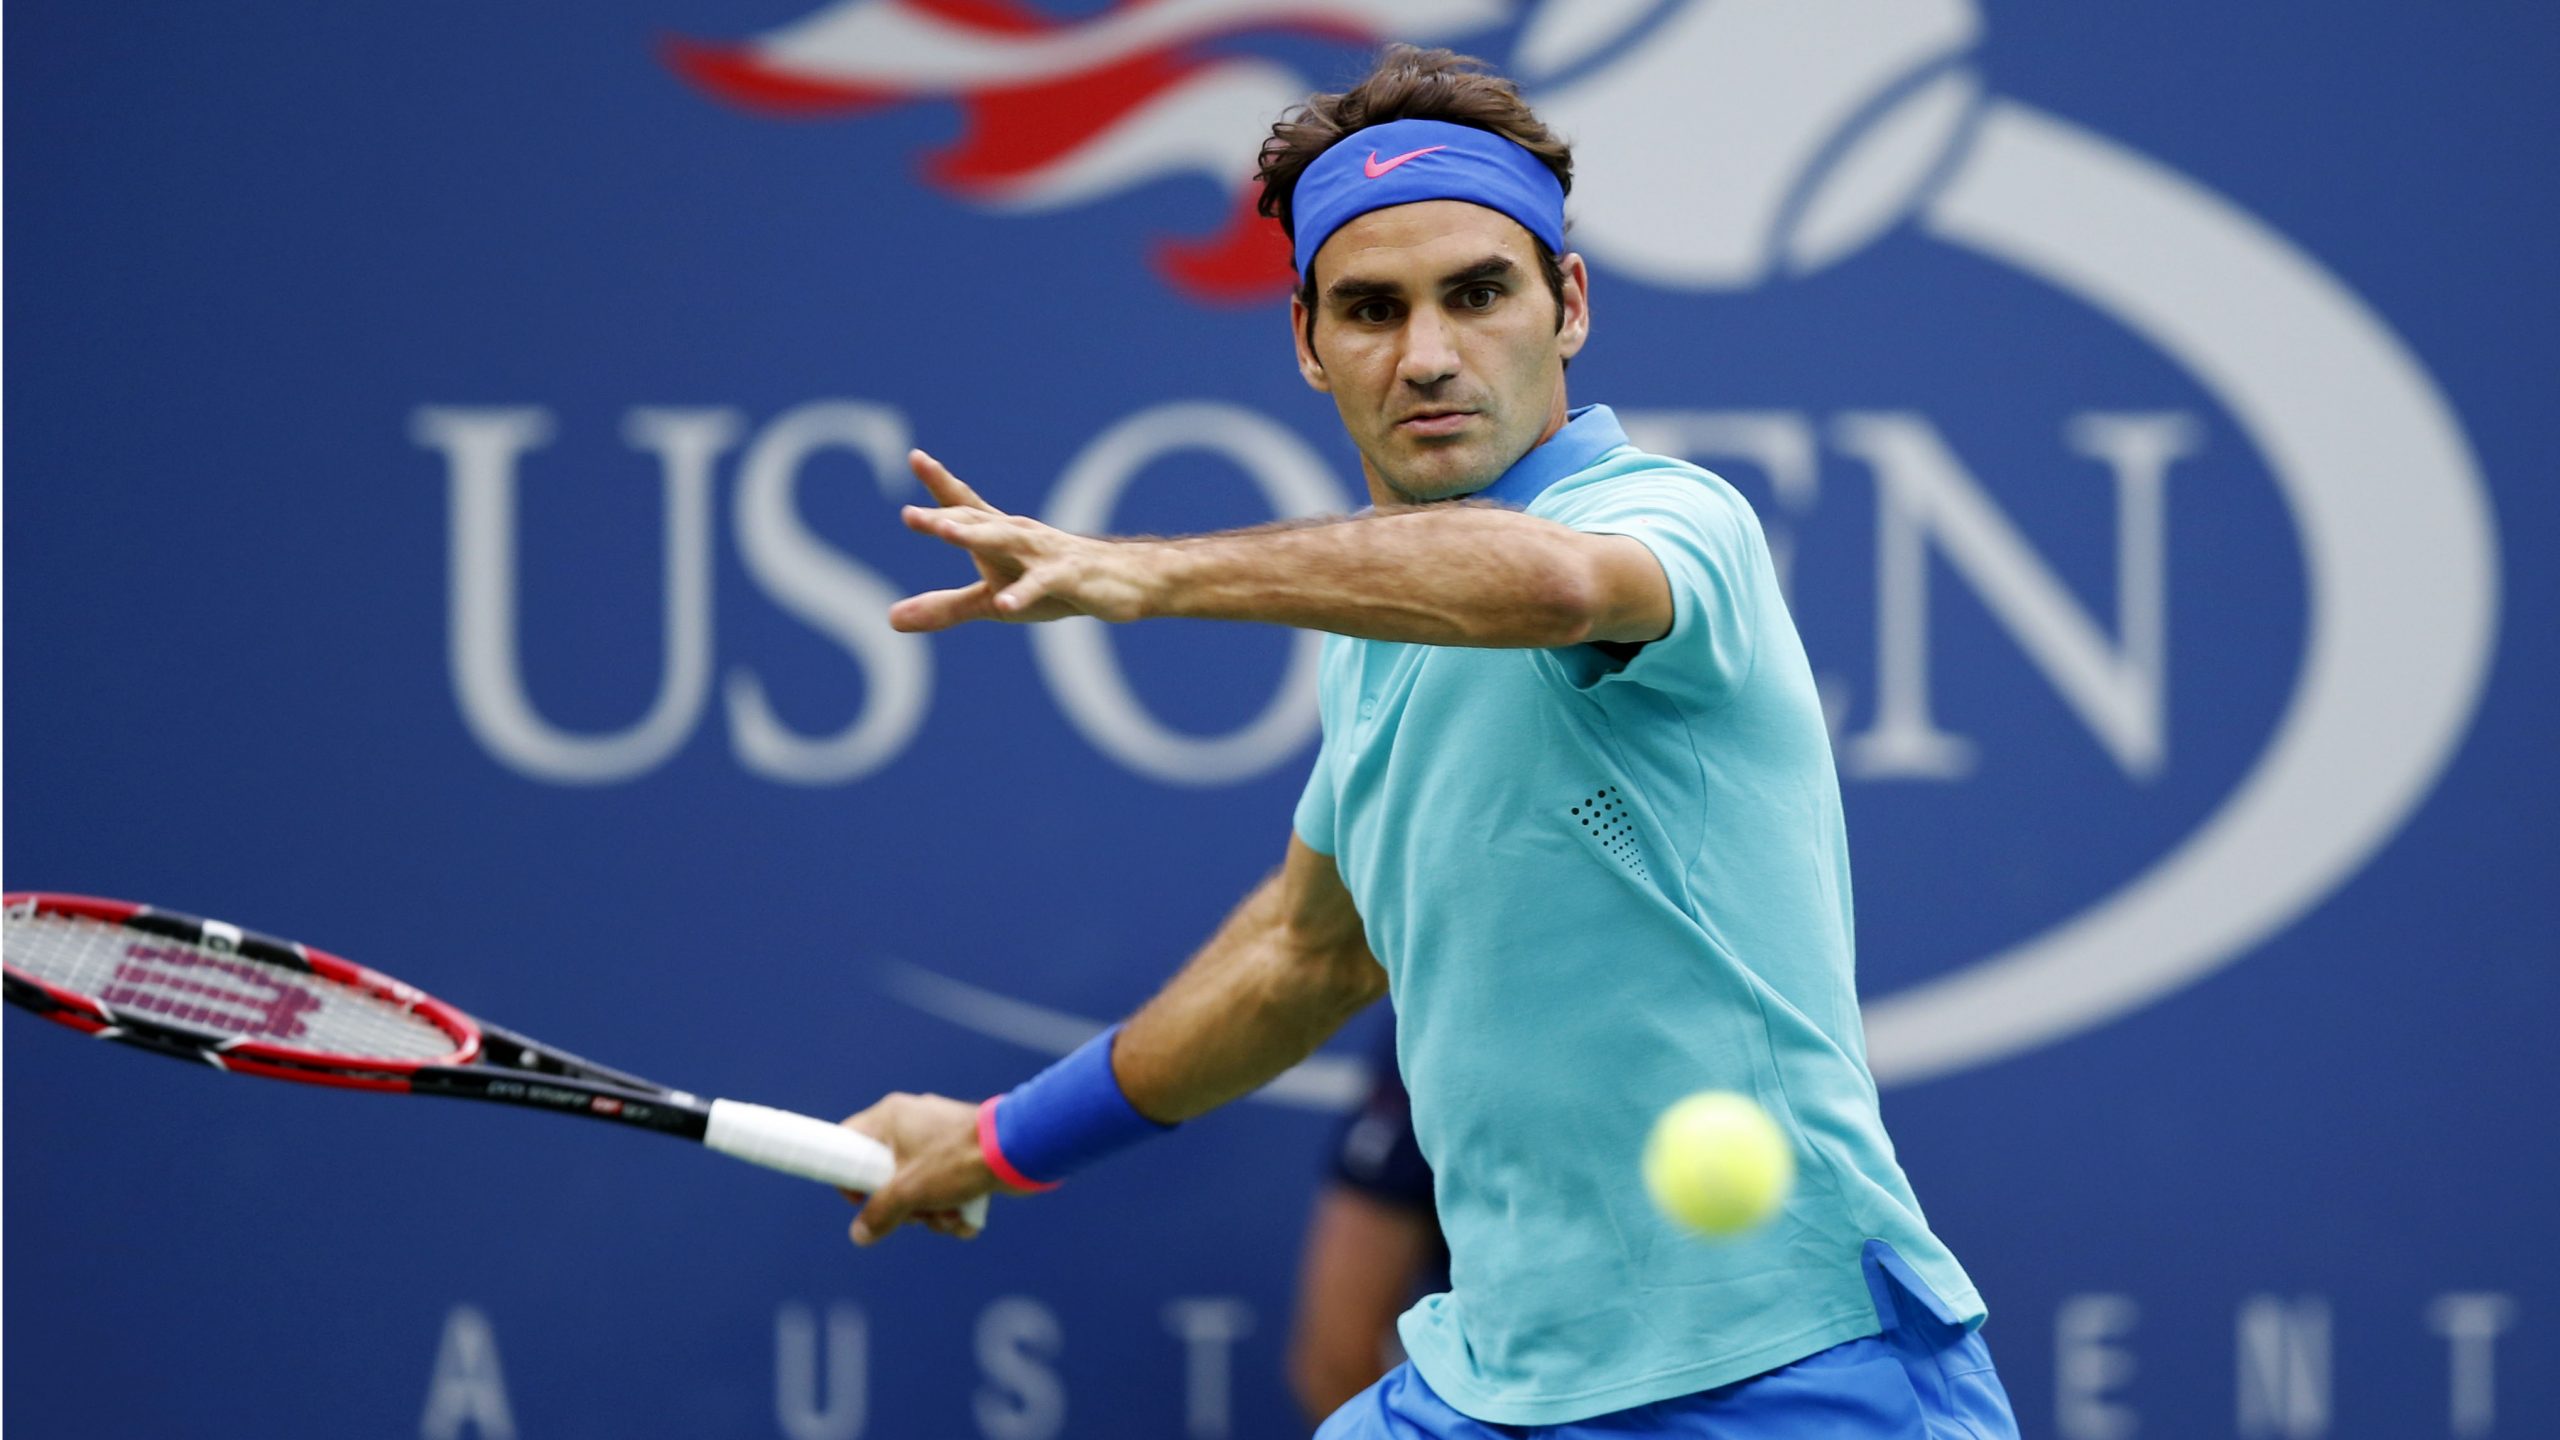 Roger Federer tries to end decade long drought at U.S. Open